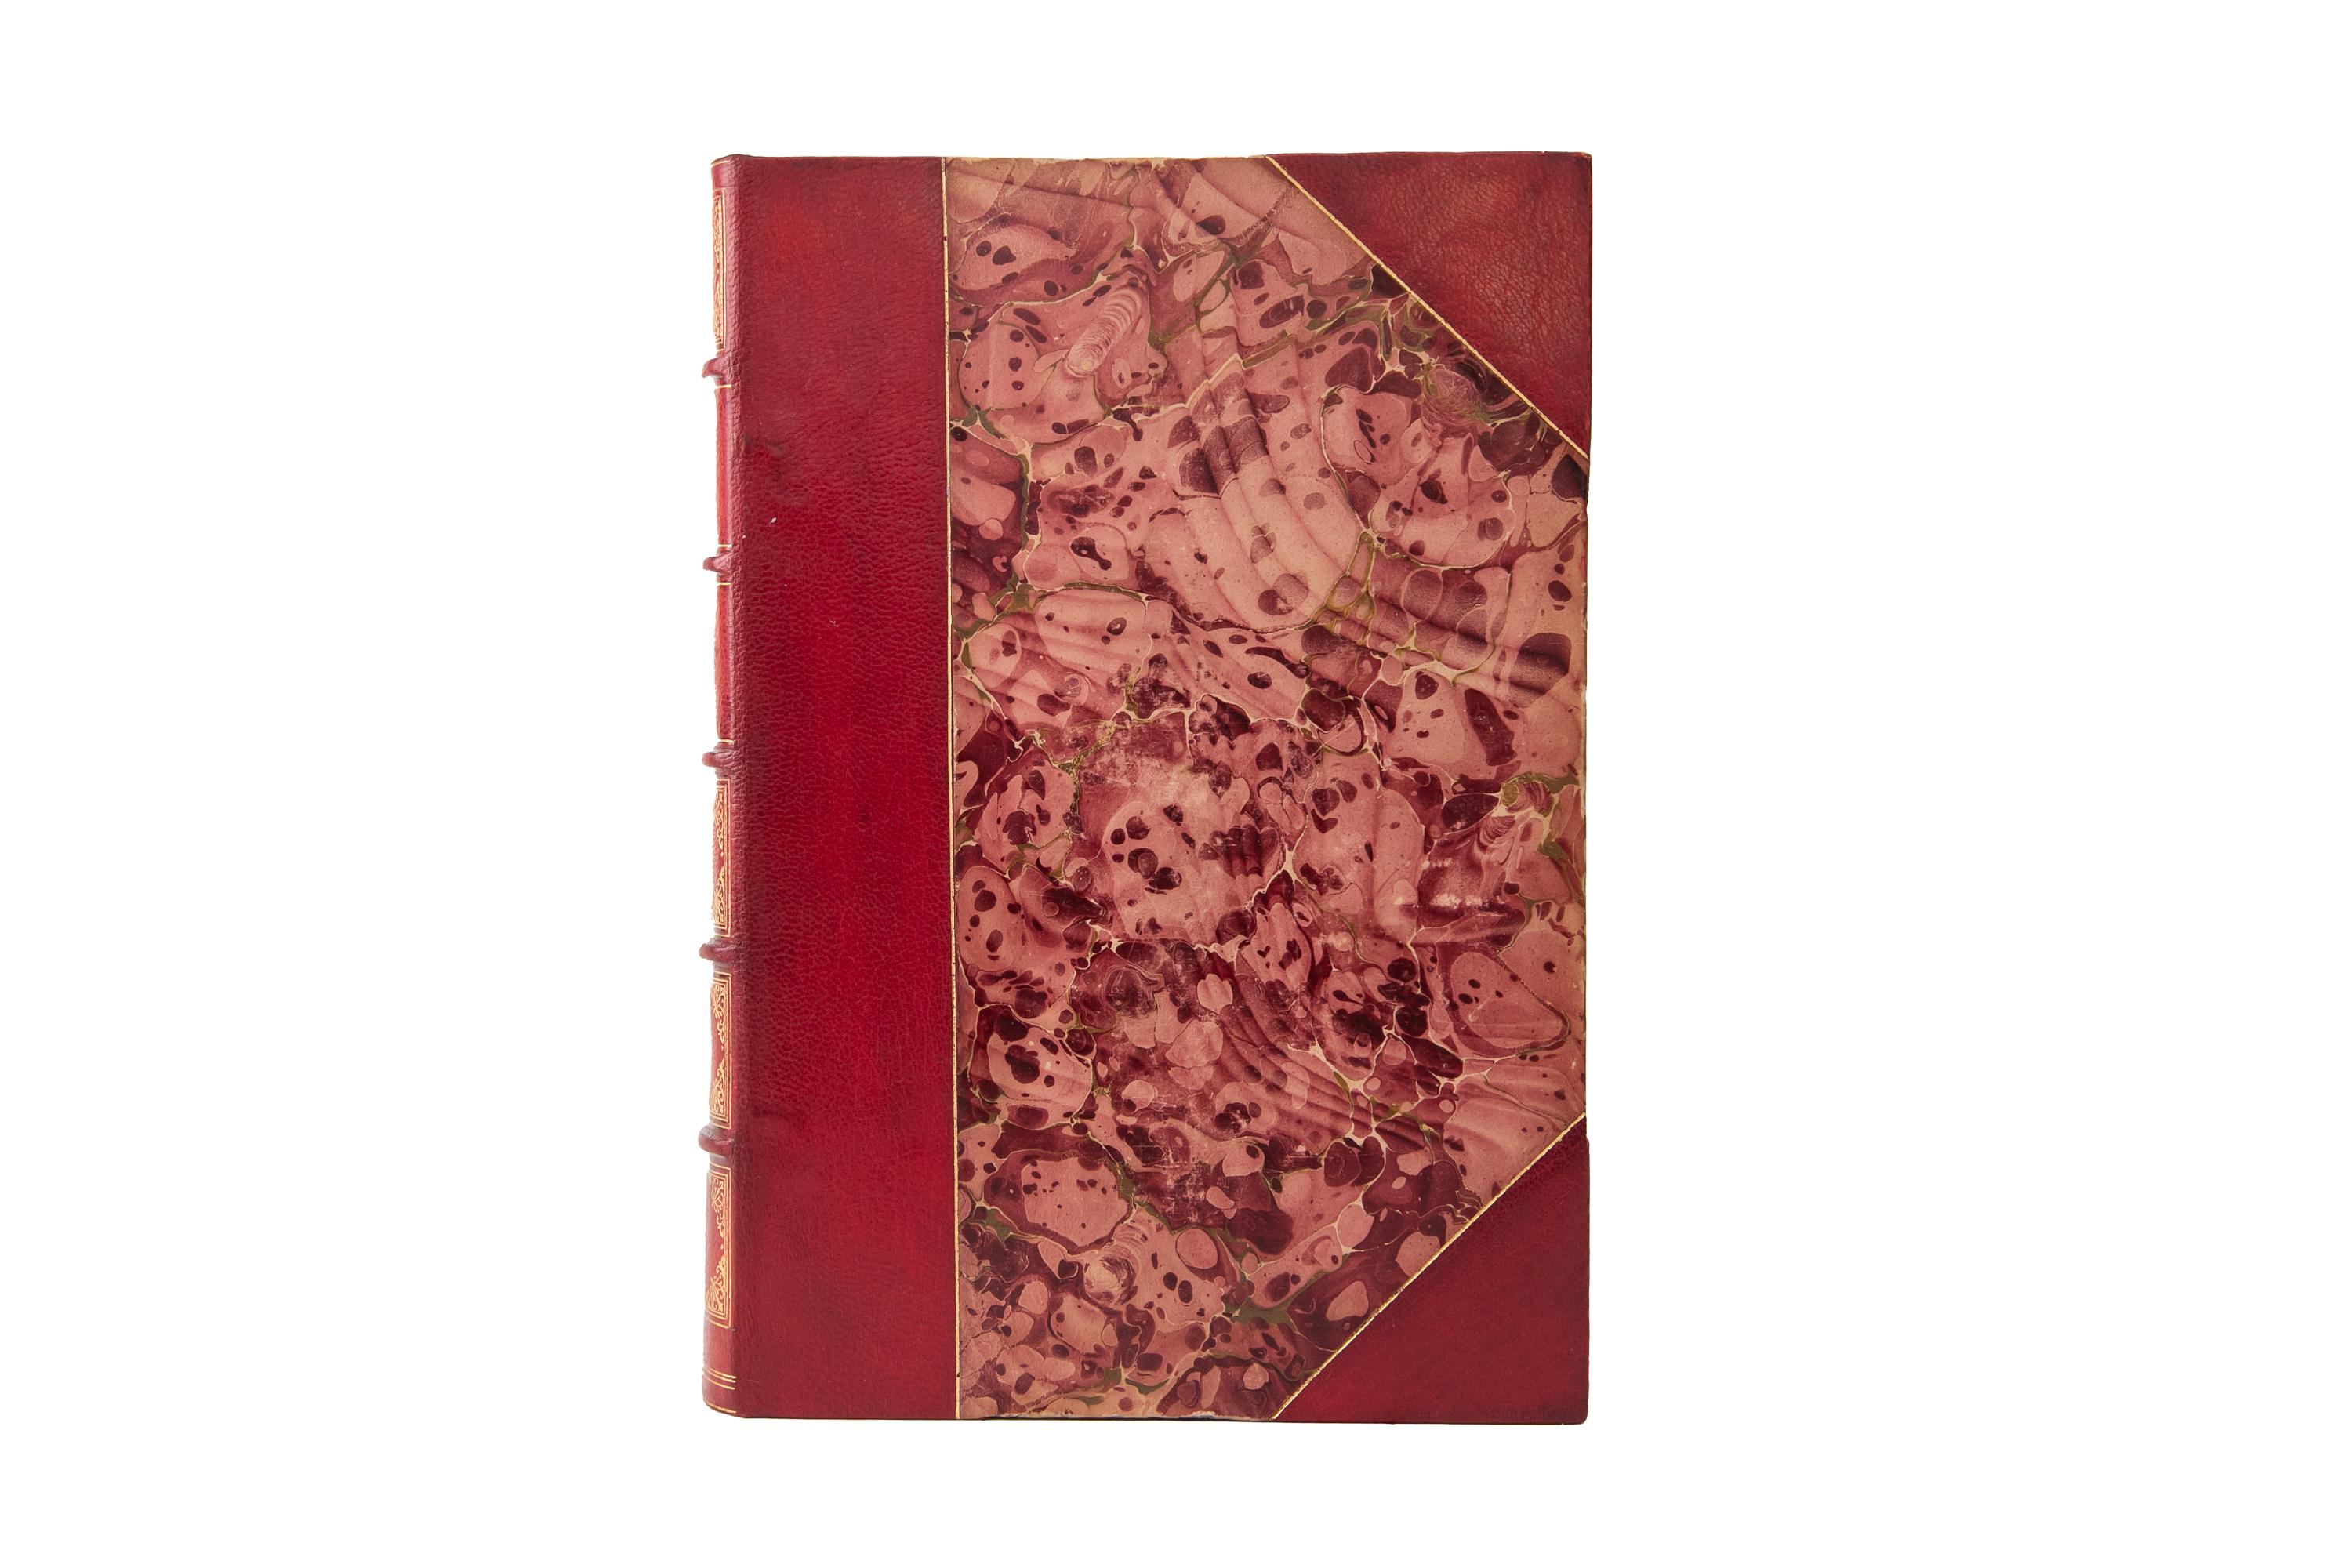 4 Volumes. J.R. Green, A Short History of English People. Illustrated Edition. Bound in 3/4 red morocco and marbled boards bordered in gilt-tooling. The raised band spines display gilt-tooled details. Top edges gilt with marbled endpapers. Edited by